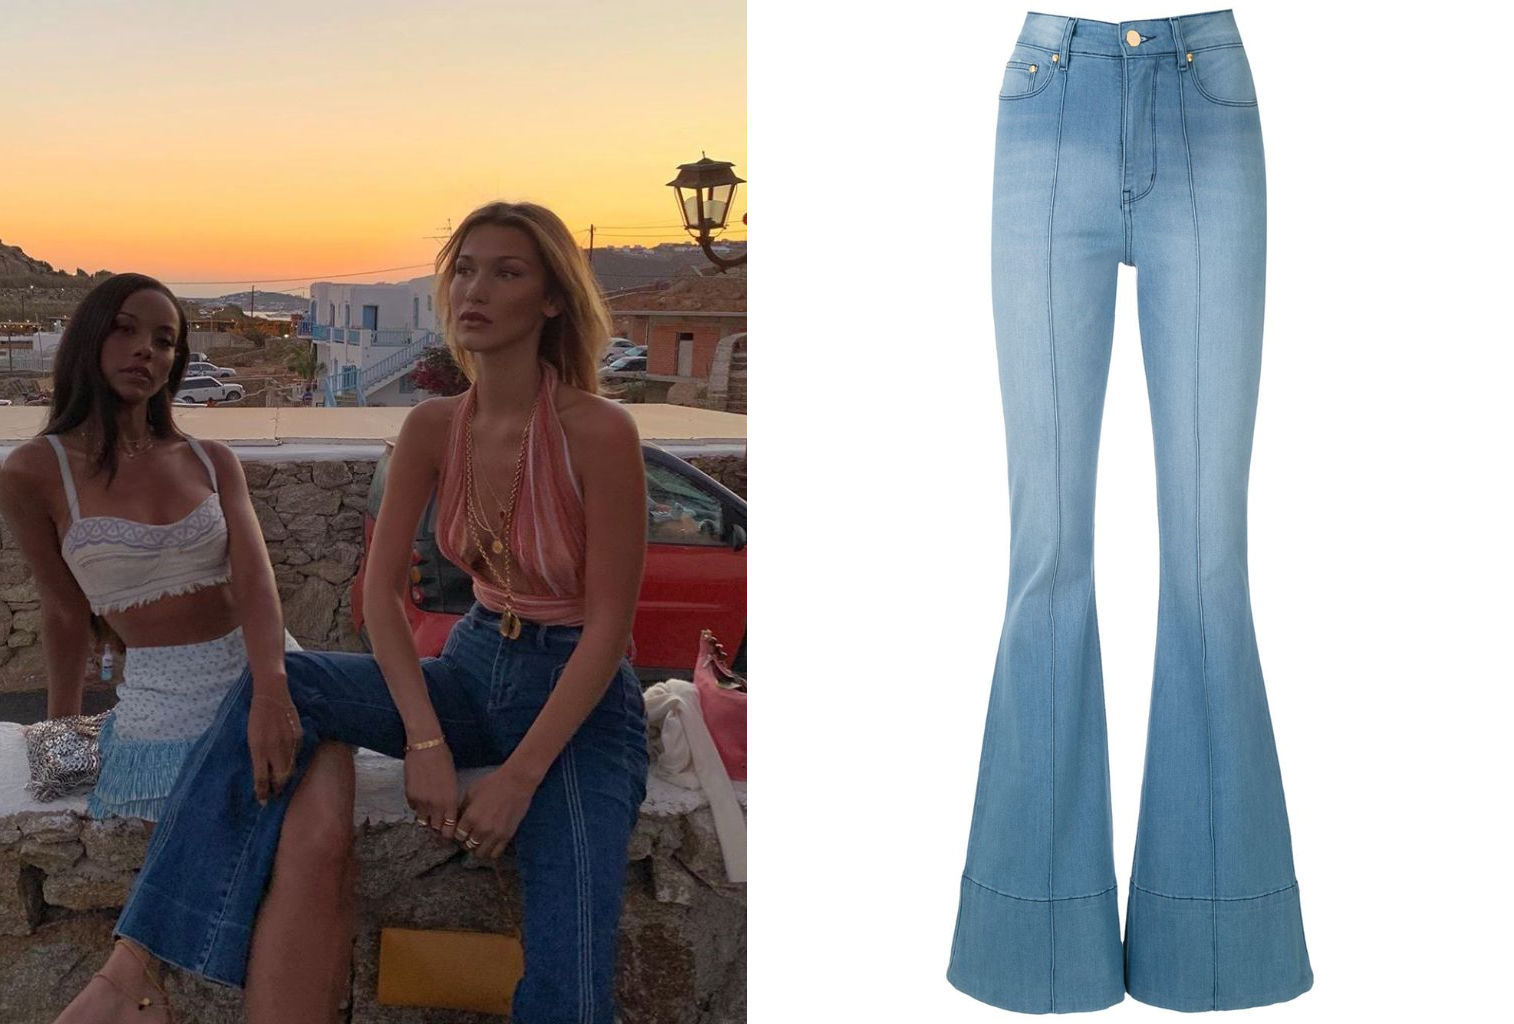 Bell bottom pants from the 1970s are back  Bell bottom pants from the 1970s  are back